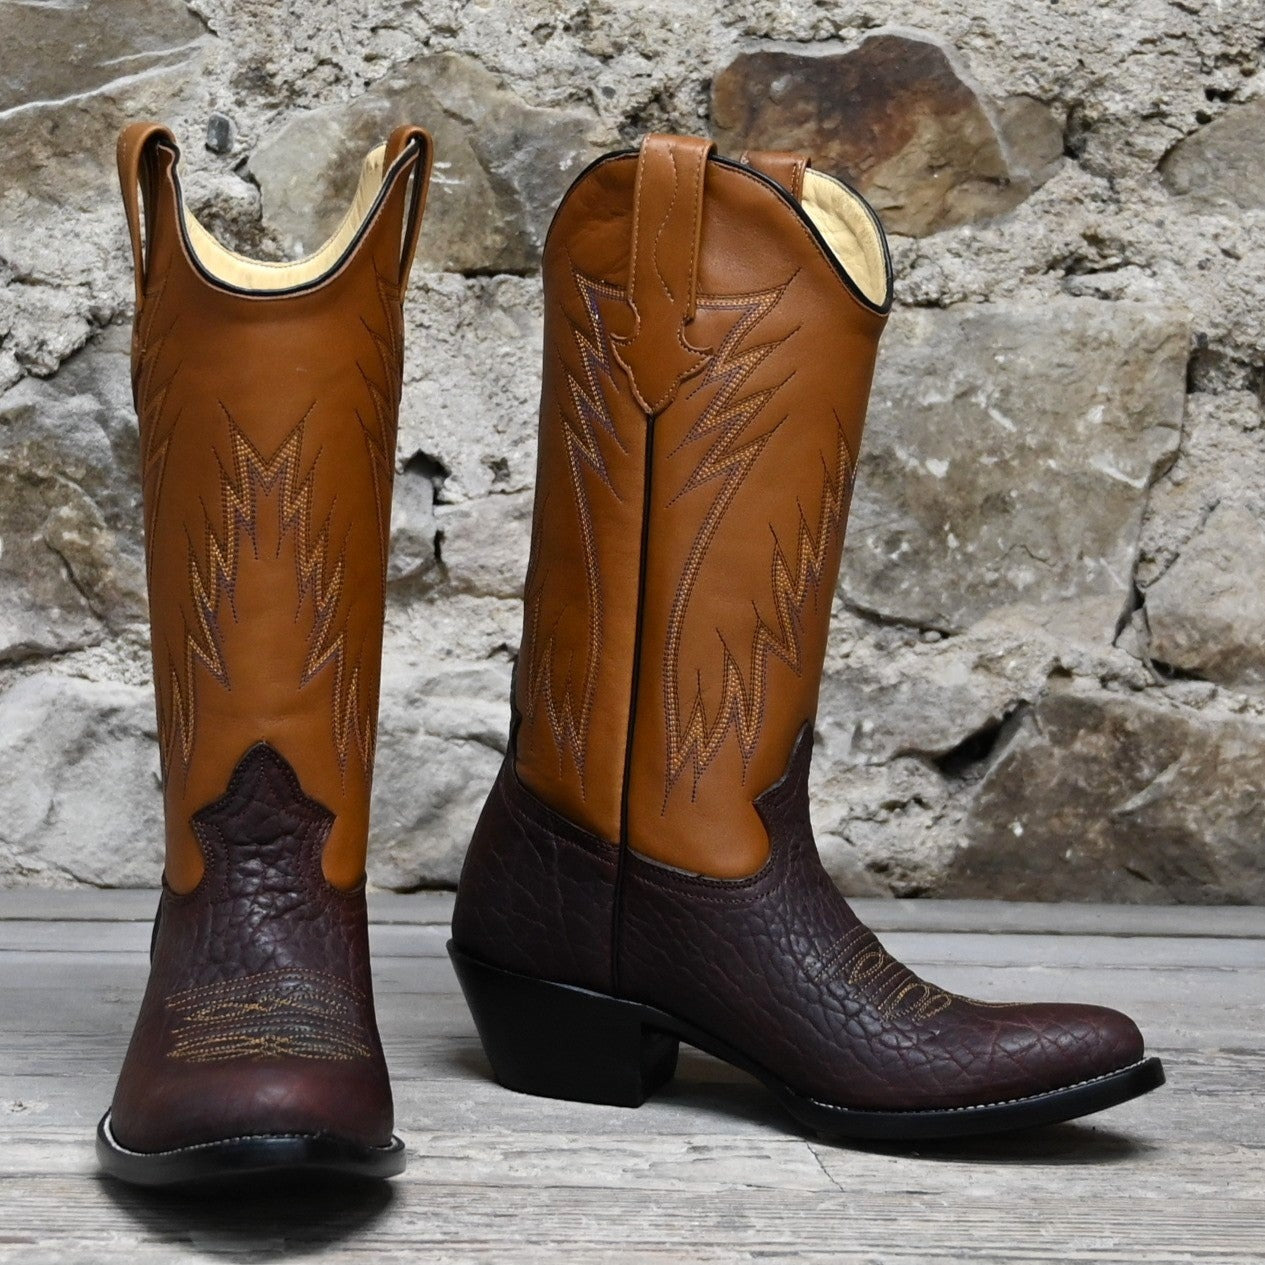 Nutted Calf Cognac Bison Boot on Custom &quot;Duke&quot; Last view of front and side